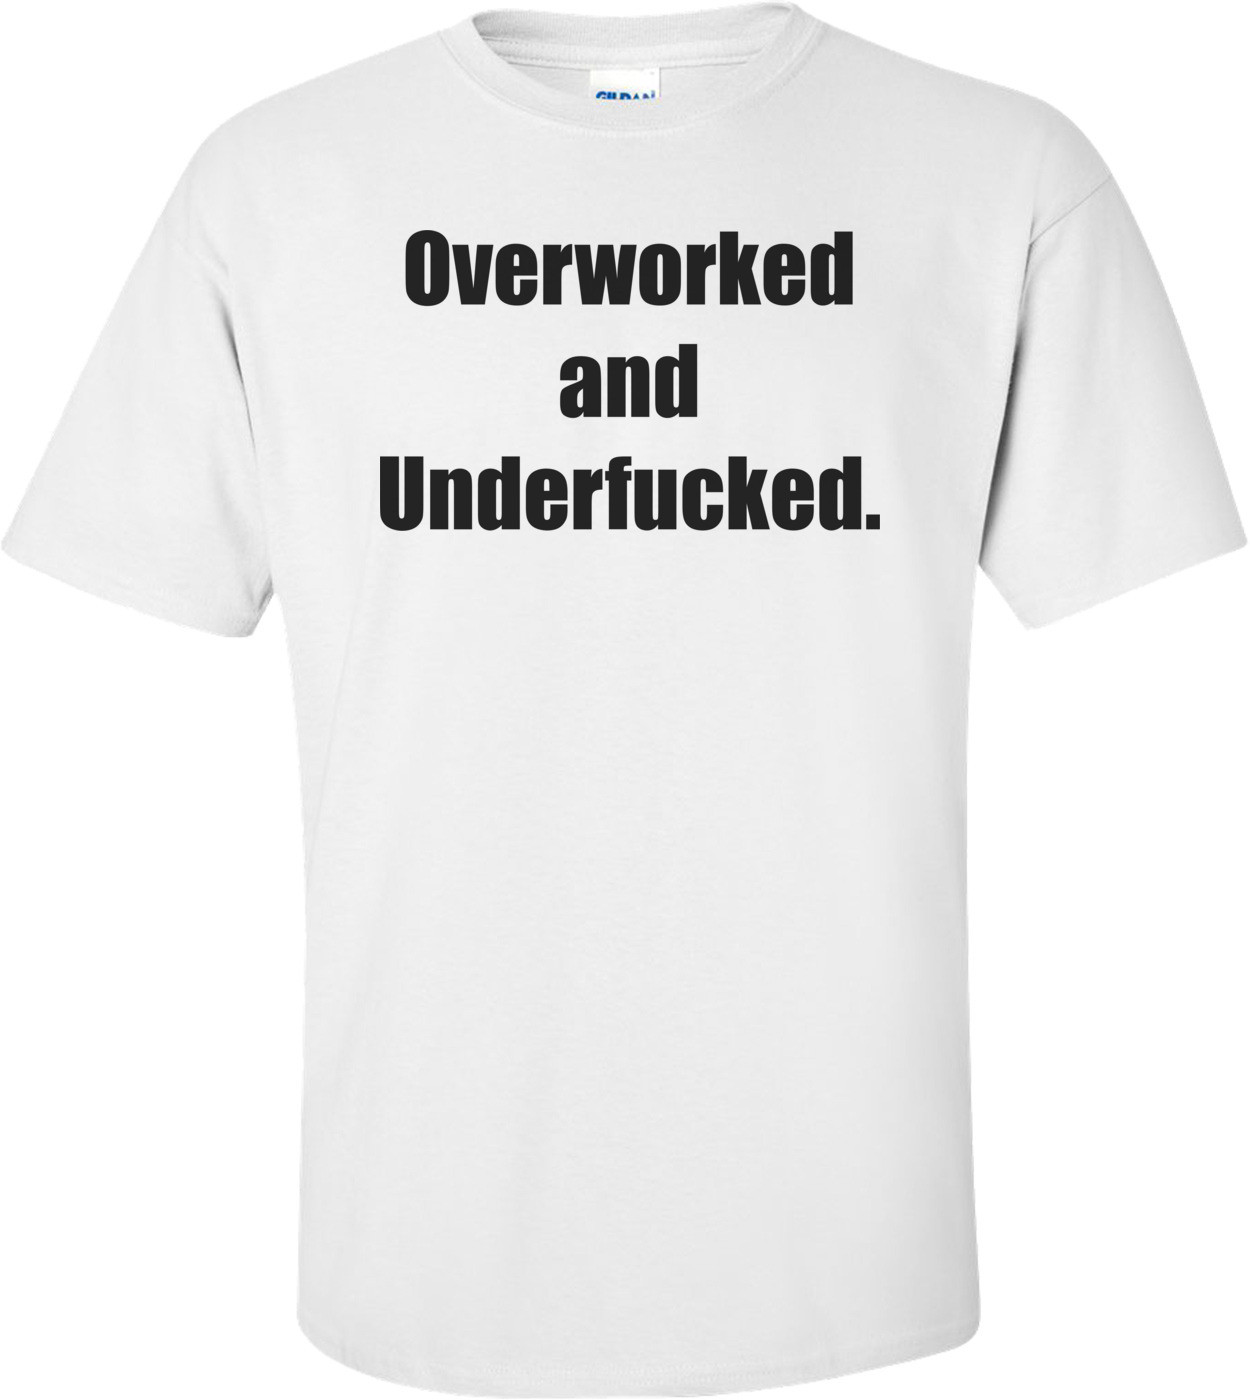 Overworked and Underfucked. Shirt